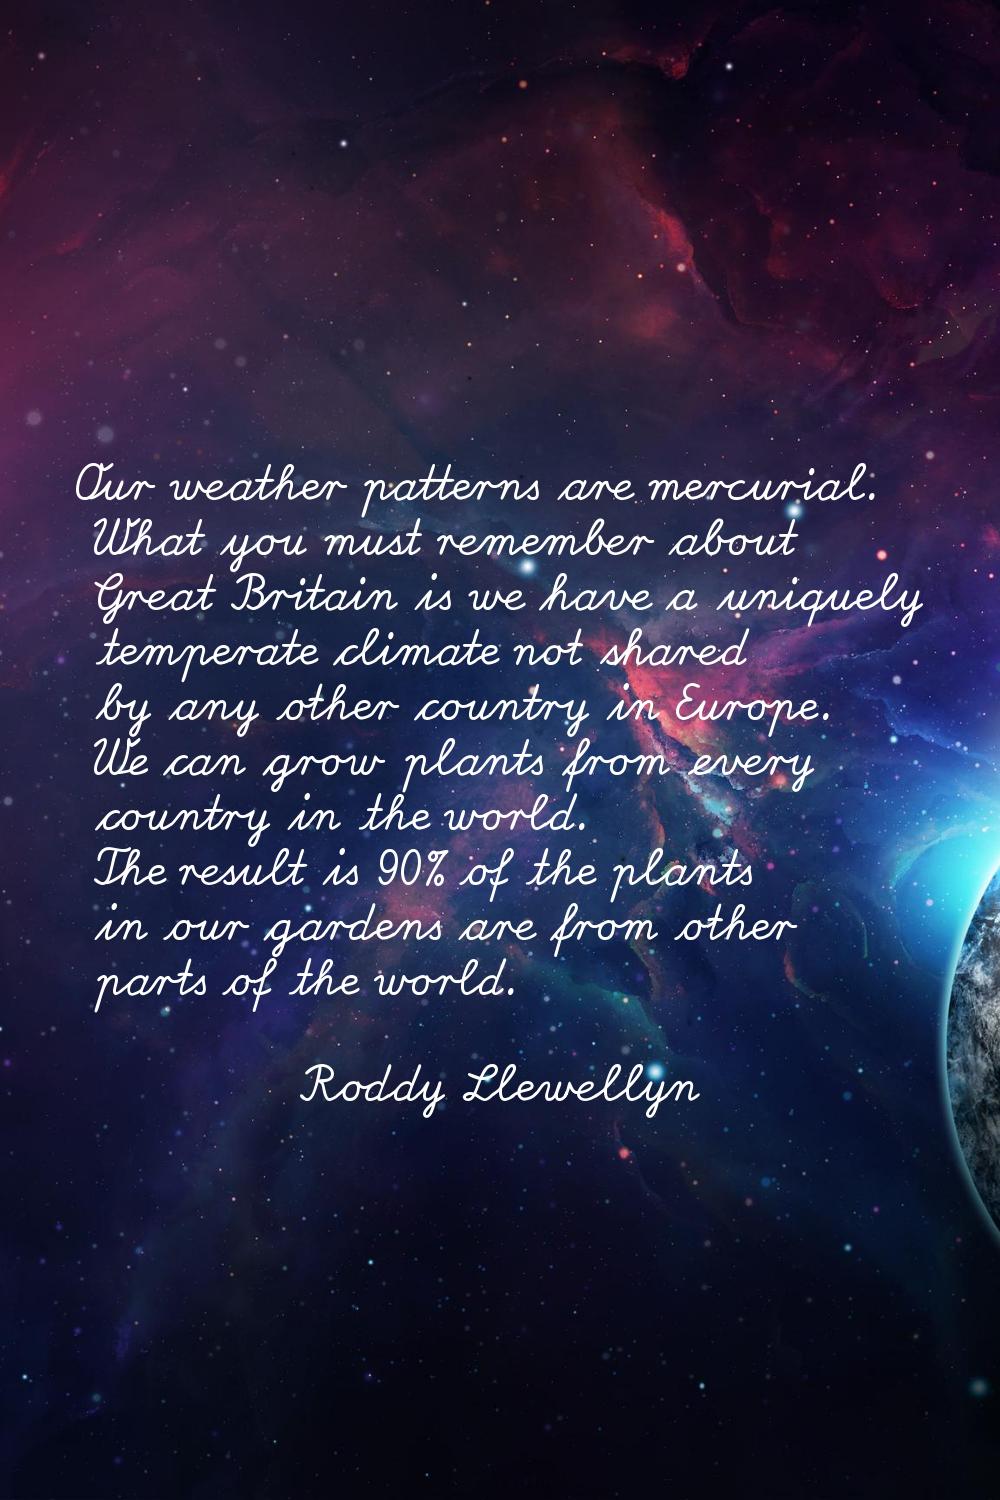 Our weather patterns are mercurial. What you must remember about Great Britain is we have a uniquel